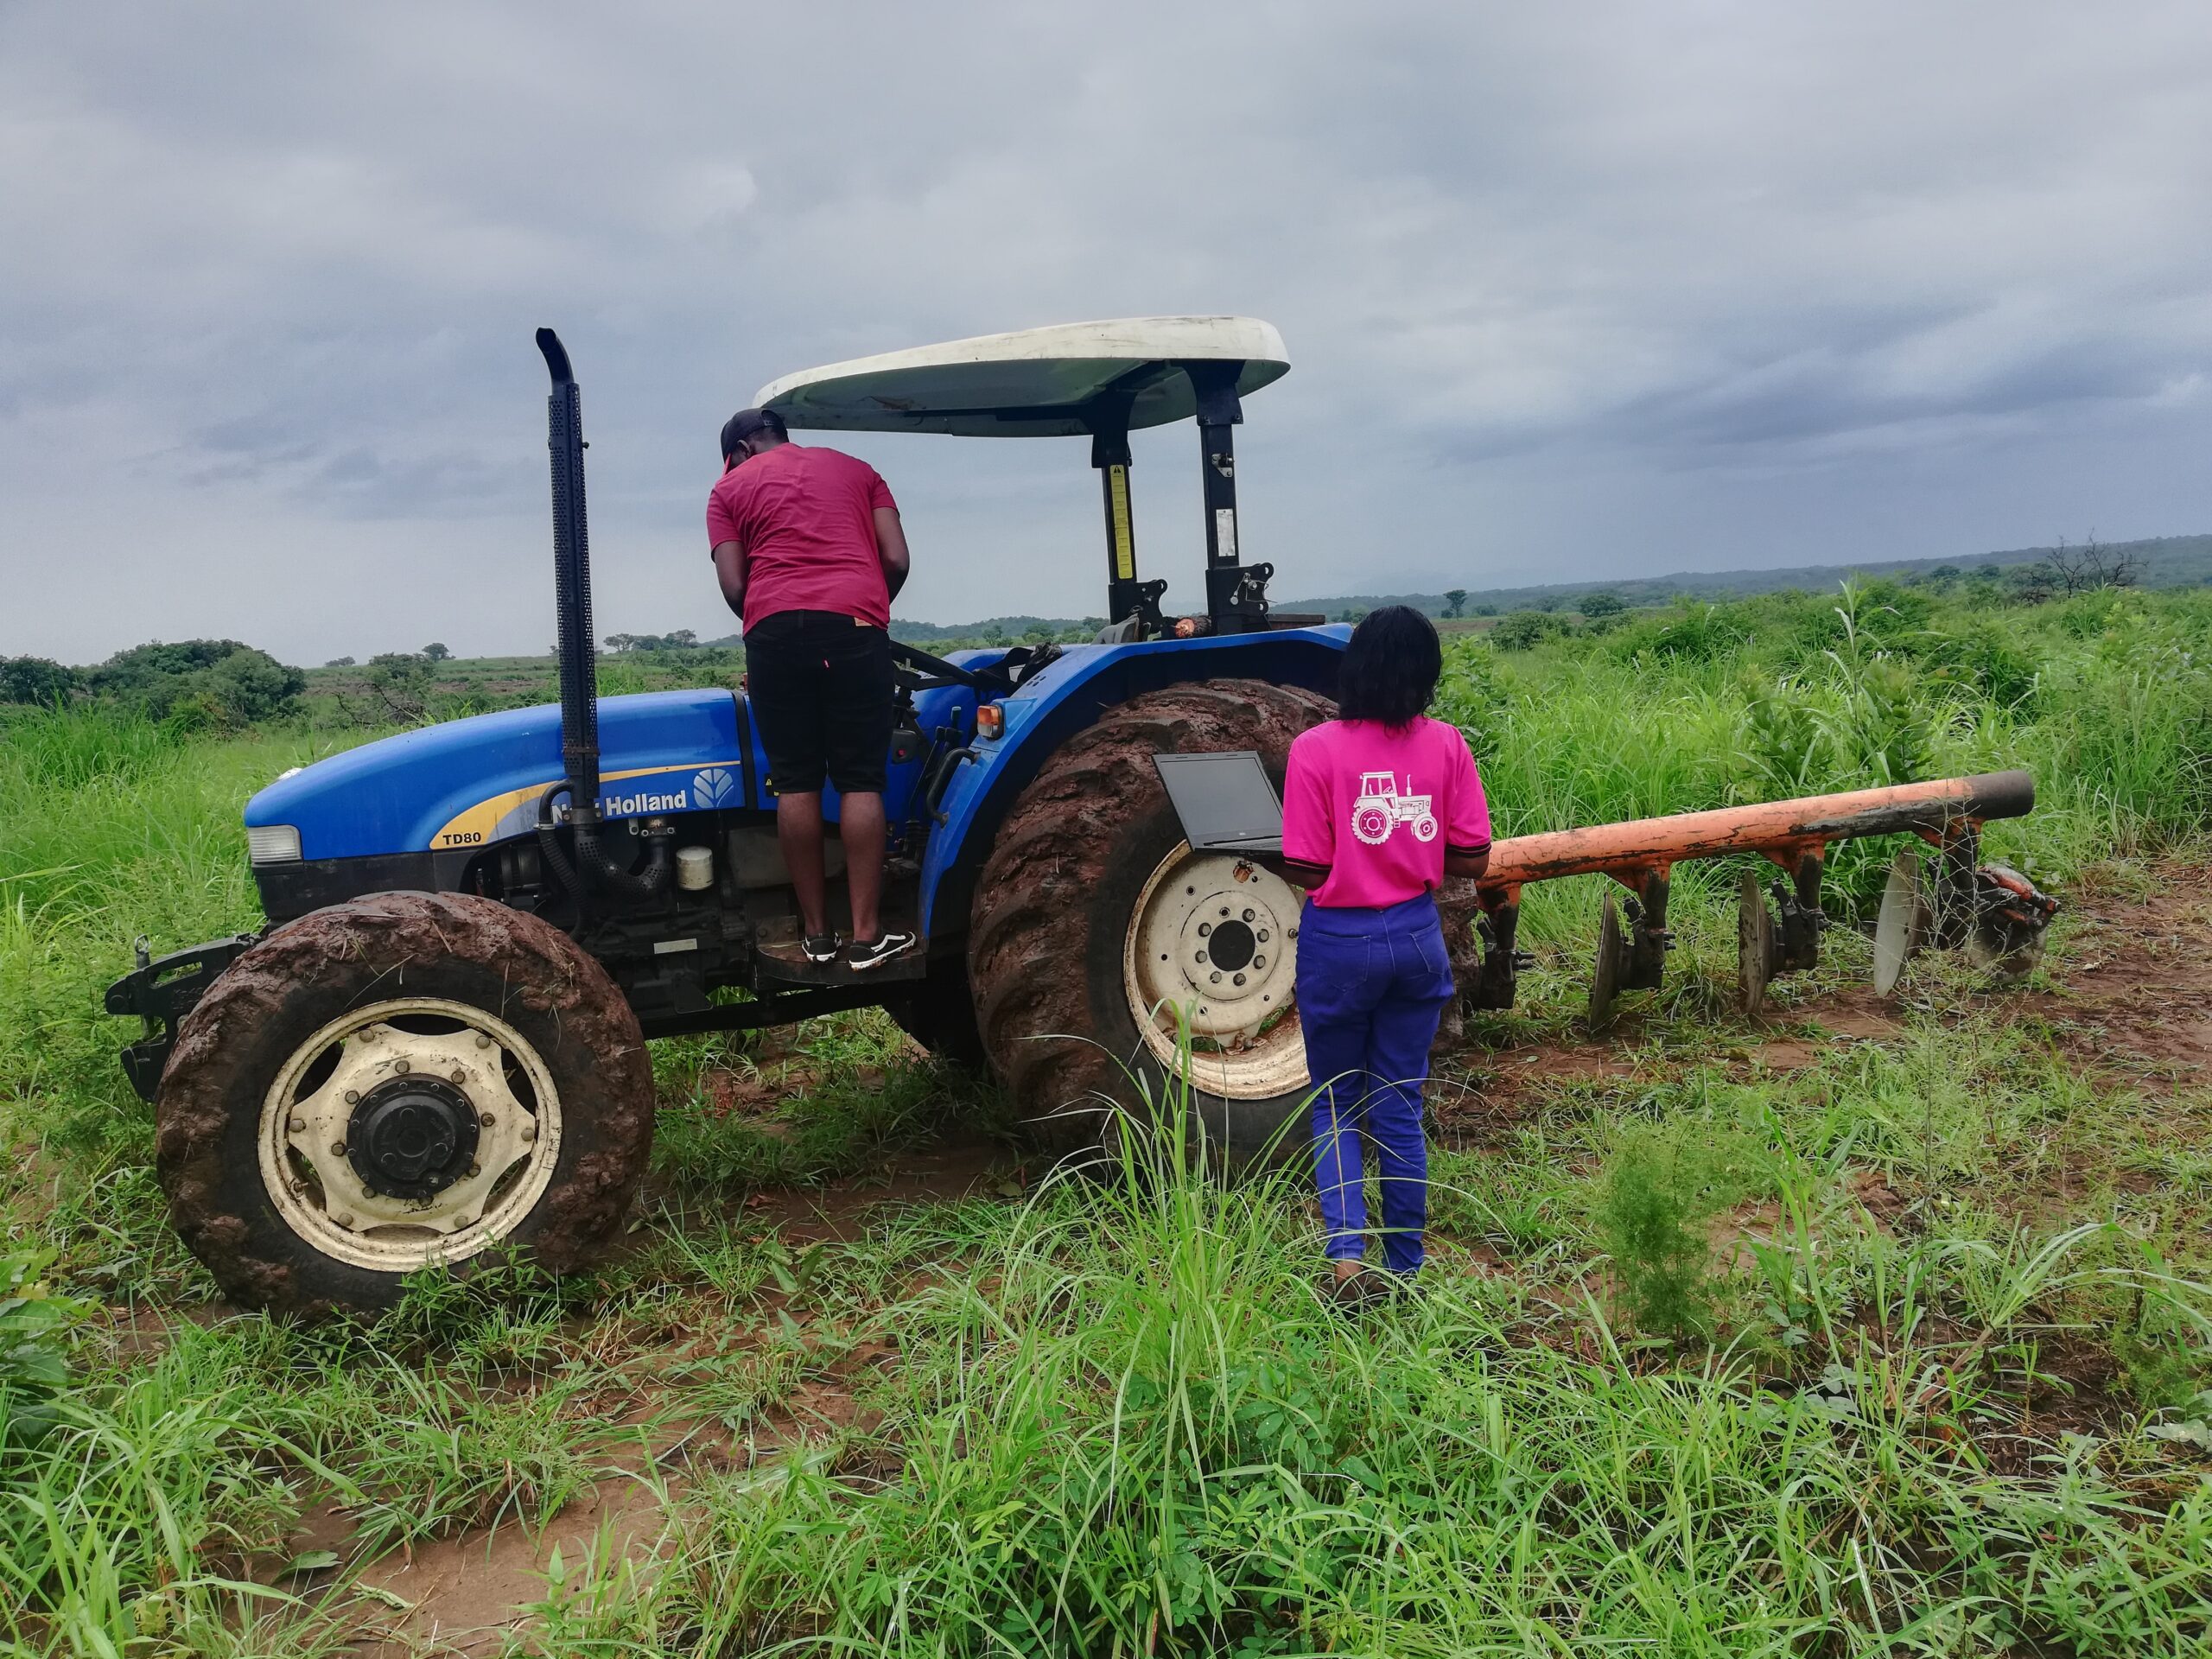 TRACTOR YARDS SERVICED BY SHALOM VENTURES